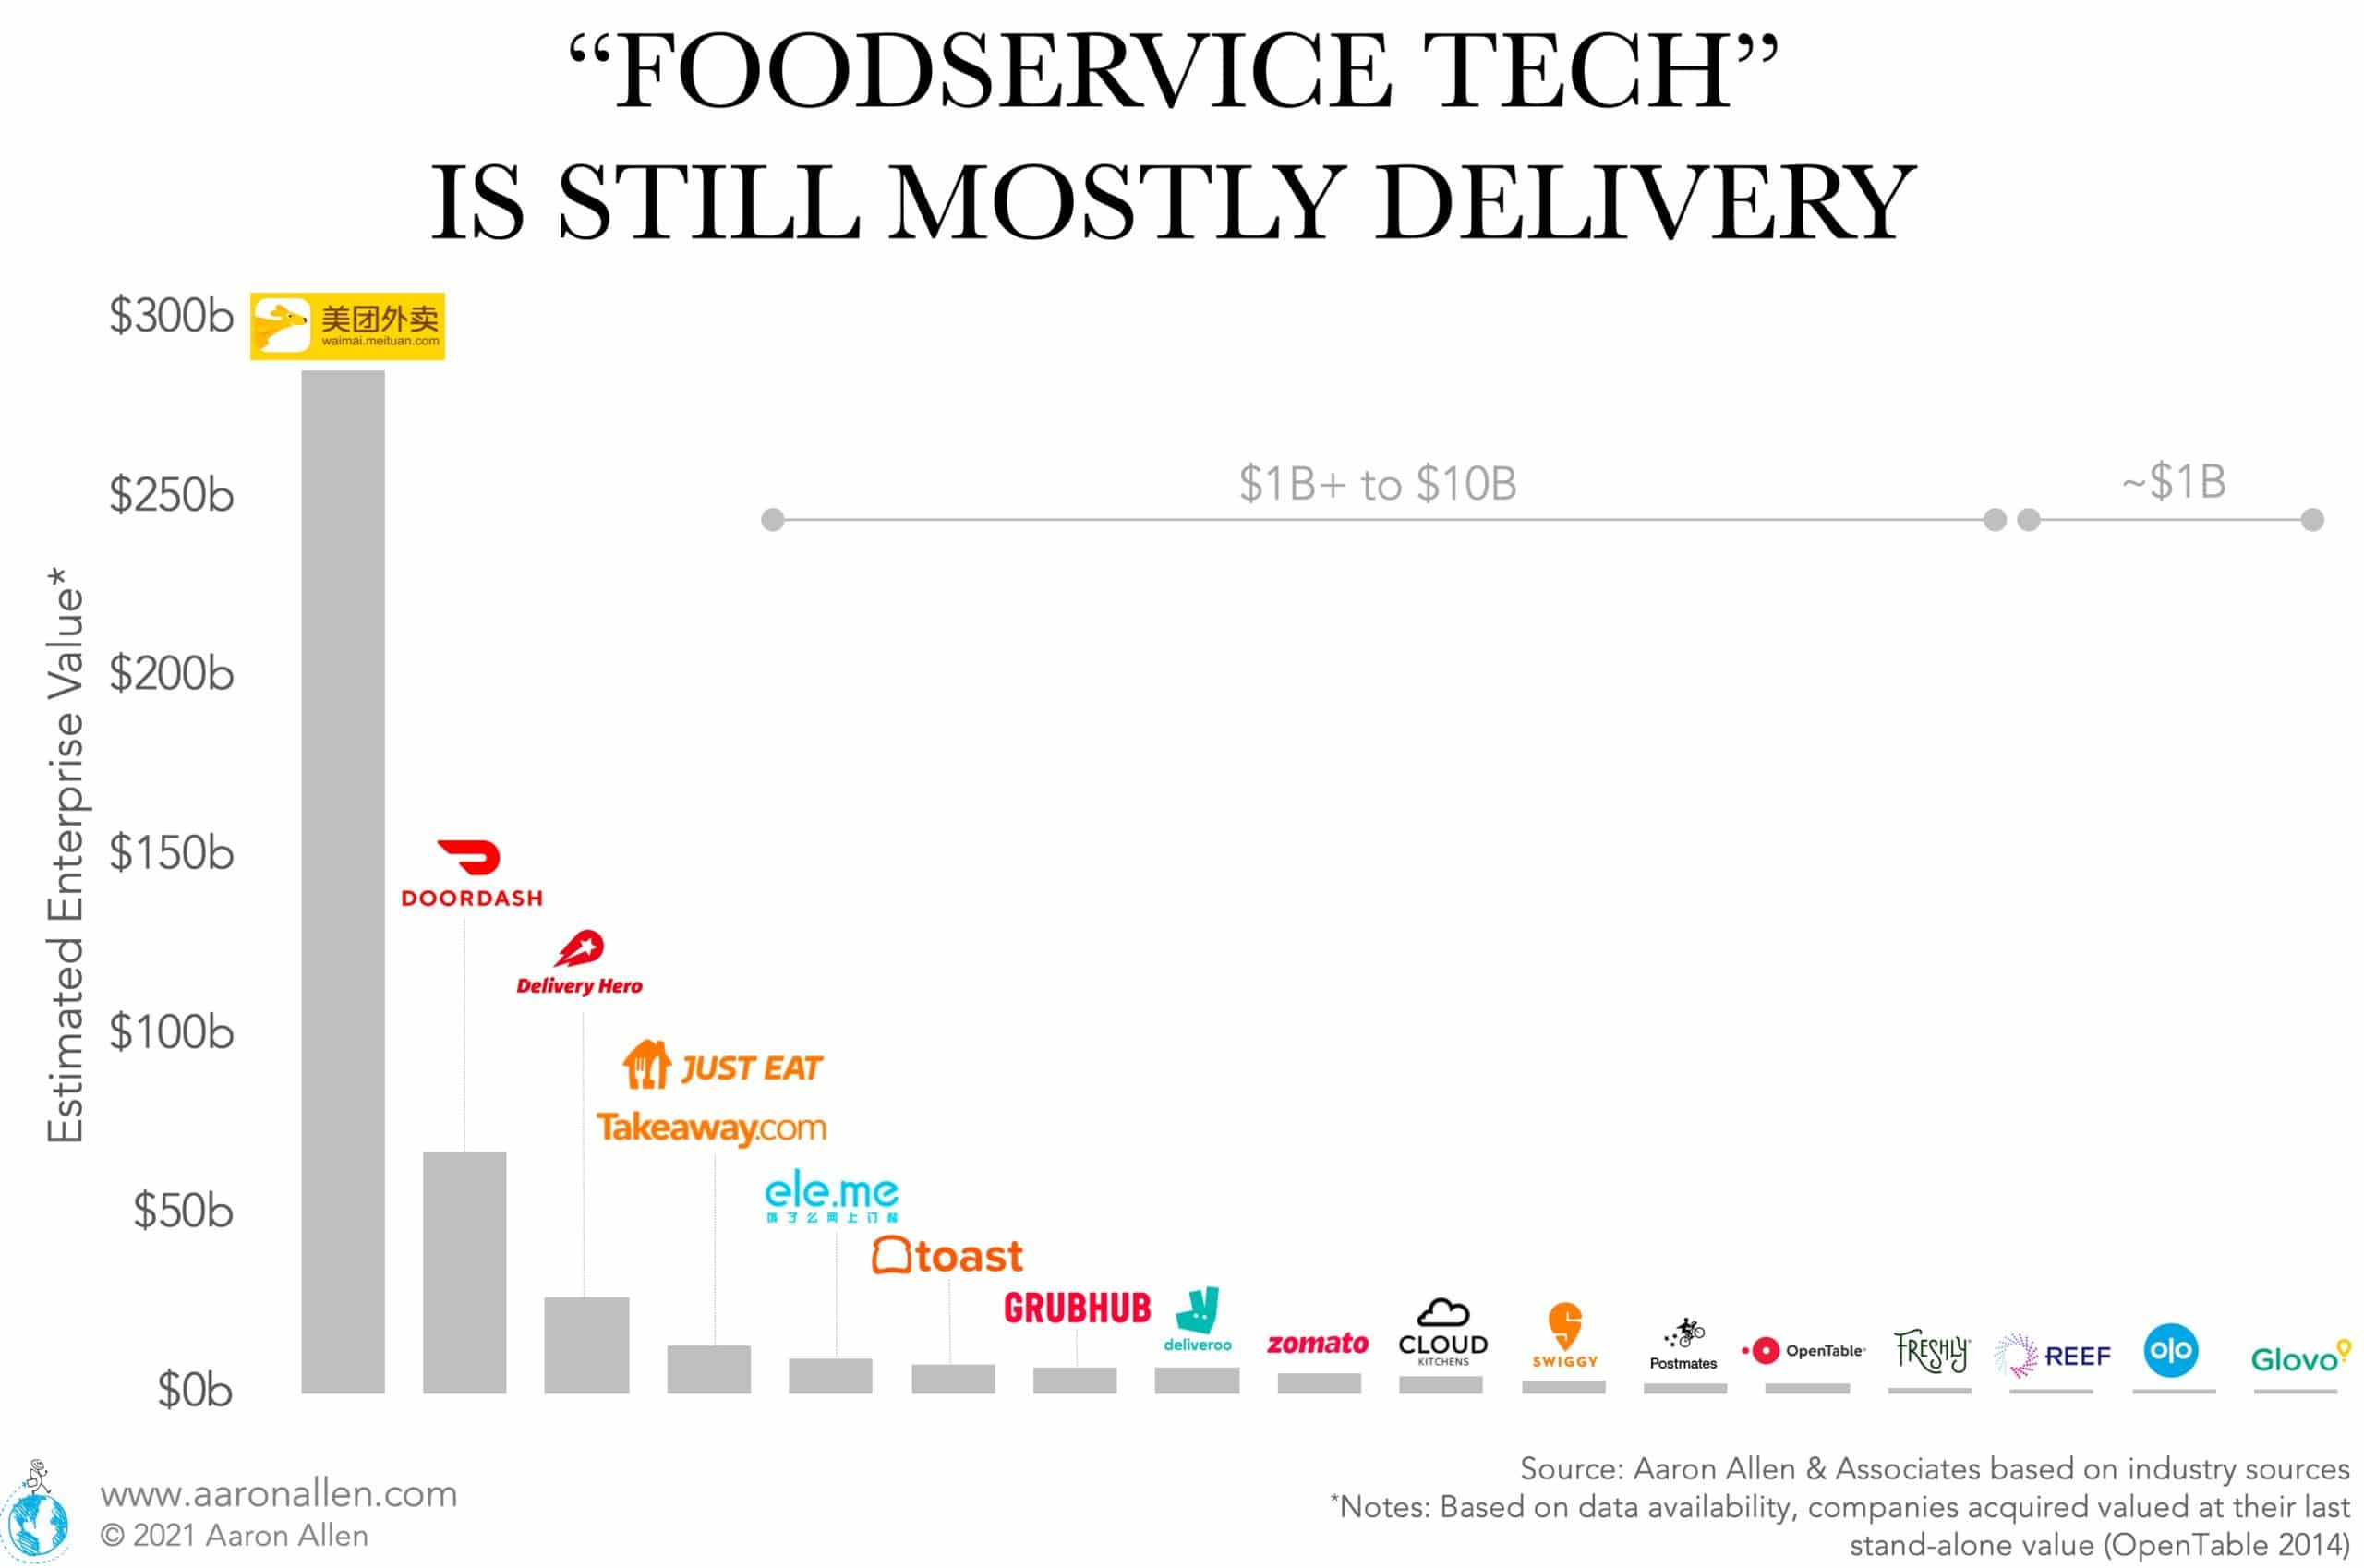 We asked a few days ago: what would you consider the most valuable foodservice technology company in the world? The eyes go quickly to operators and McDonald’s, Starbucks, Panera, Domino’s and a few large companies that have done a very good job at implementing technology. However, on the suppliers’ side, it’s really concentrated just with the delivery companies and a handful of others.  We put our own list together and came up with 17 companies breaking the $1 billion mark and collectively worth more than $450 billion.  For as much as everyone is talking robotics, automation, IoT, etc. these companies are still not realizing valuations this high (yet). We are currently in the bronze age of restaurant technology, the golden age is about to come. When we look at tech, we think “how is this going to make life better for restaurants?” And we have found a couple of gems with a great shot at becoming the most valuable foodservice tech in the world.